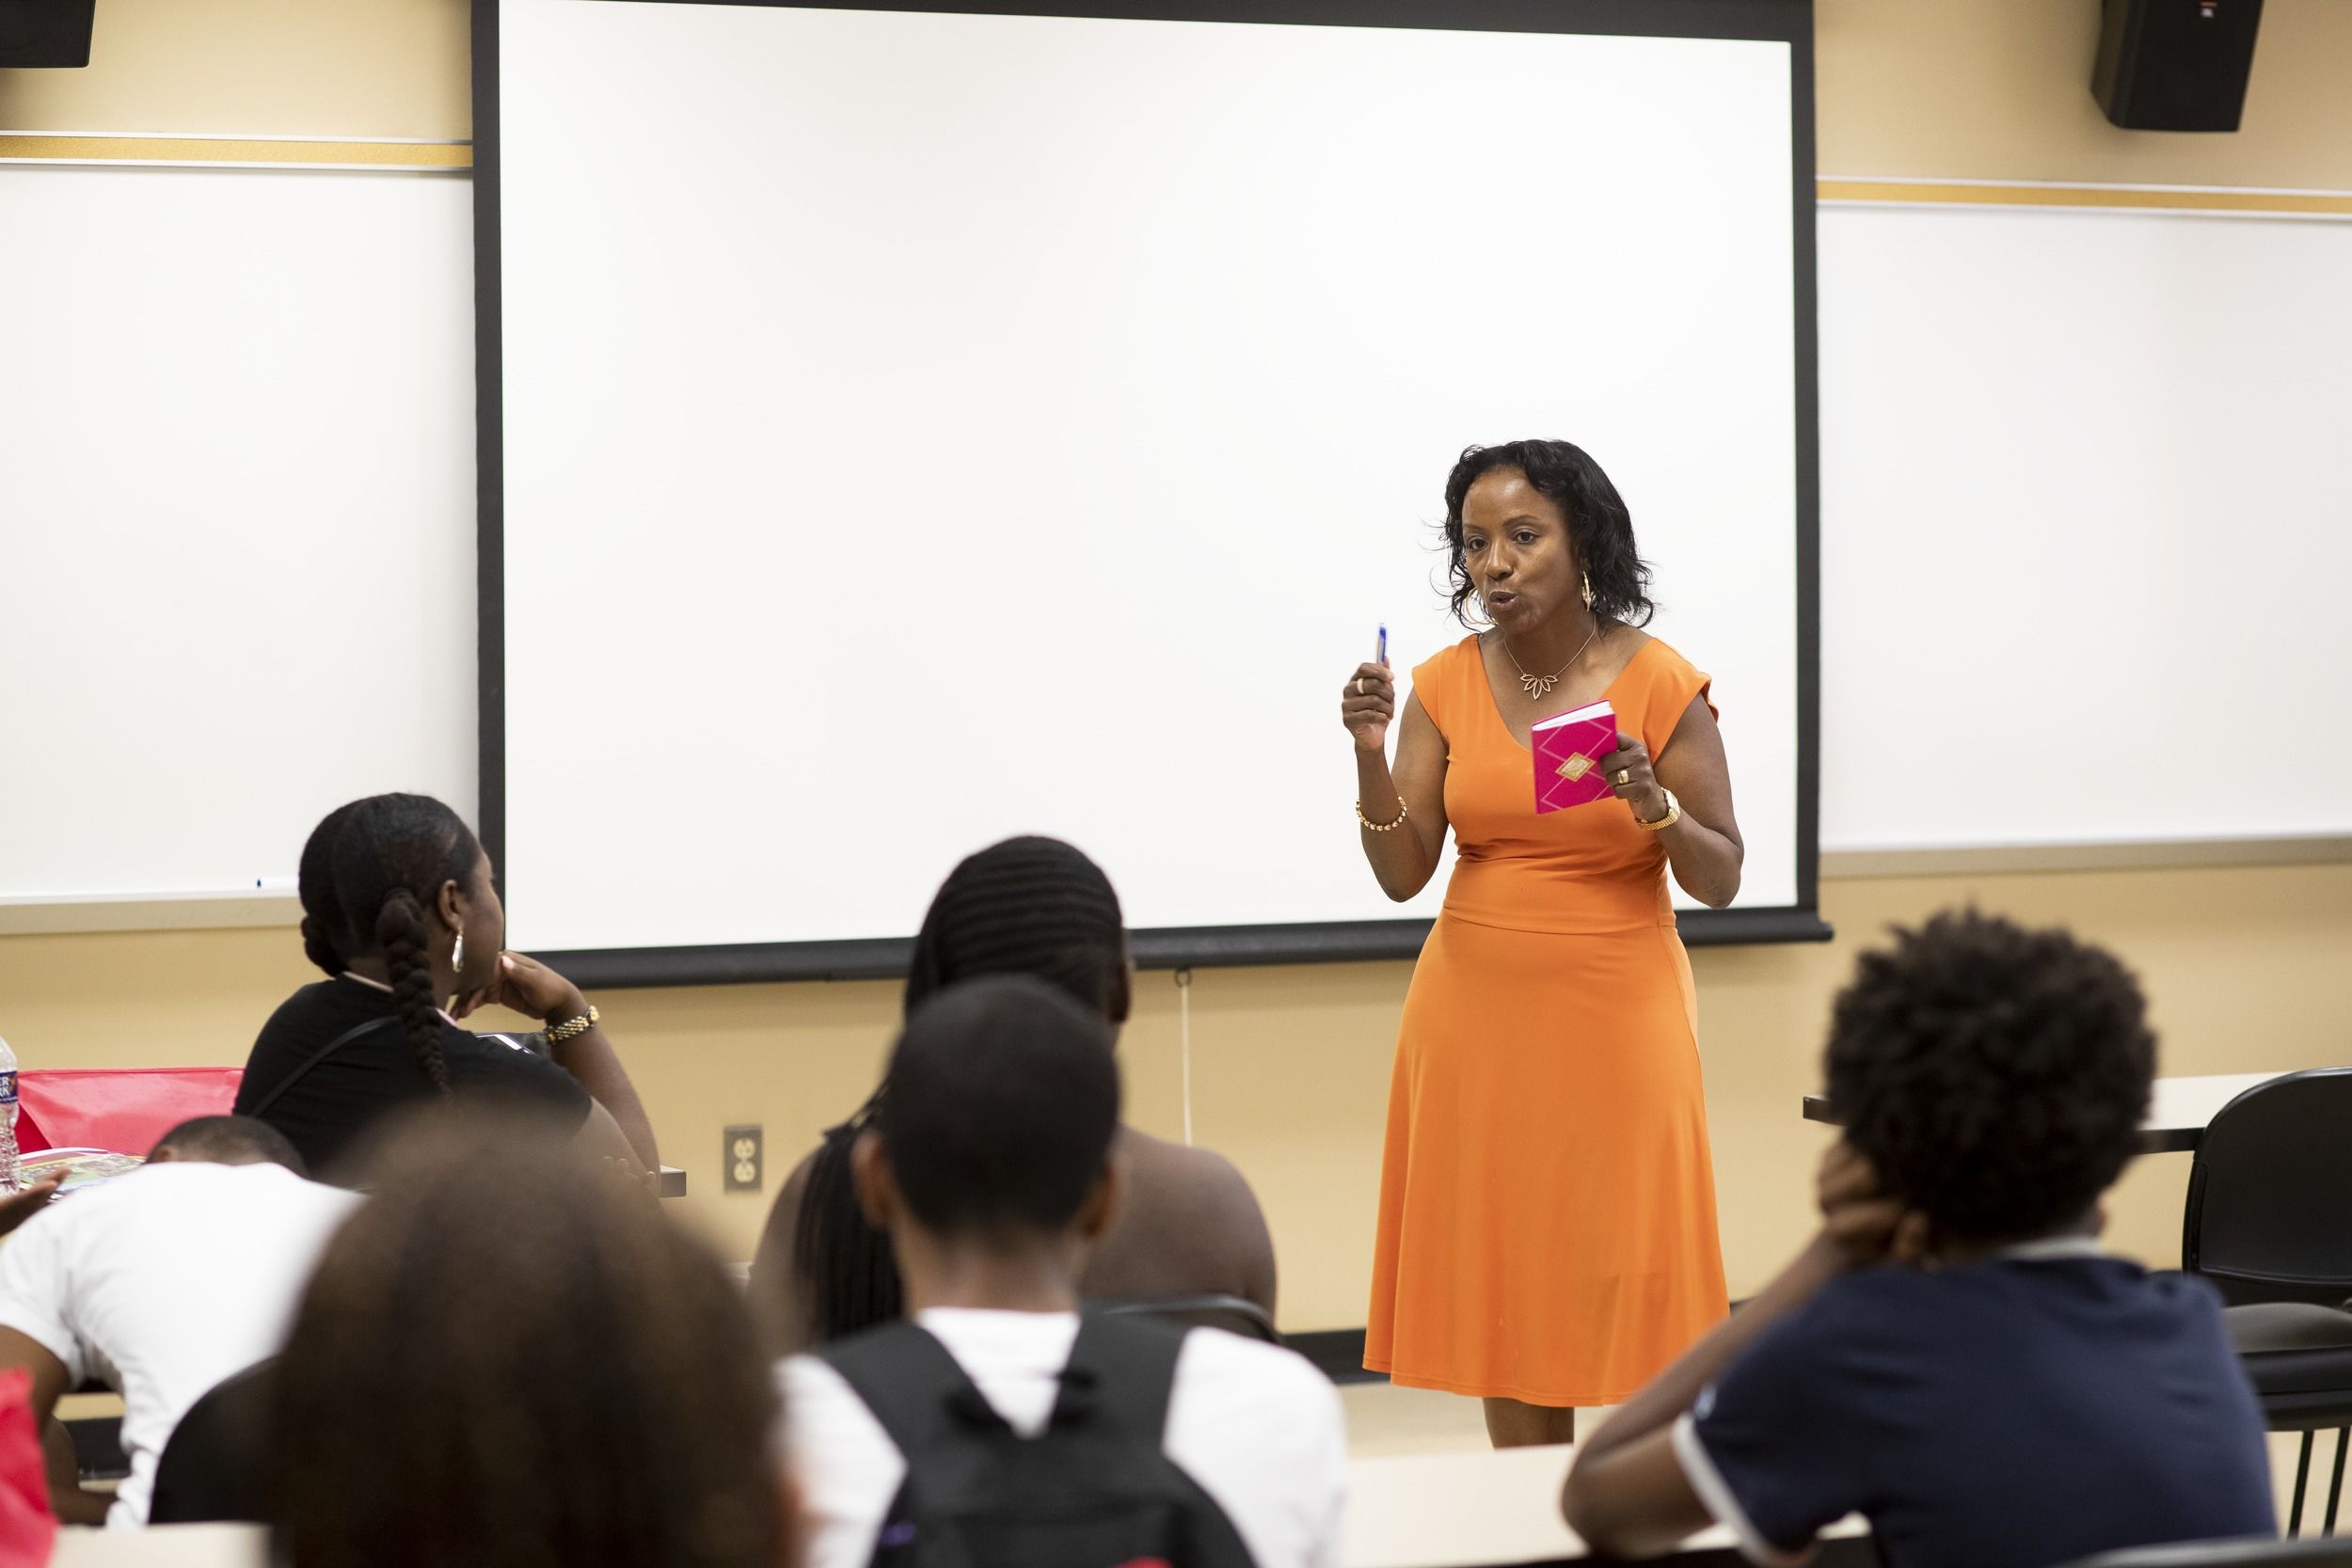 A professor in an orange dress lectures at the front of a classroom.